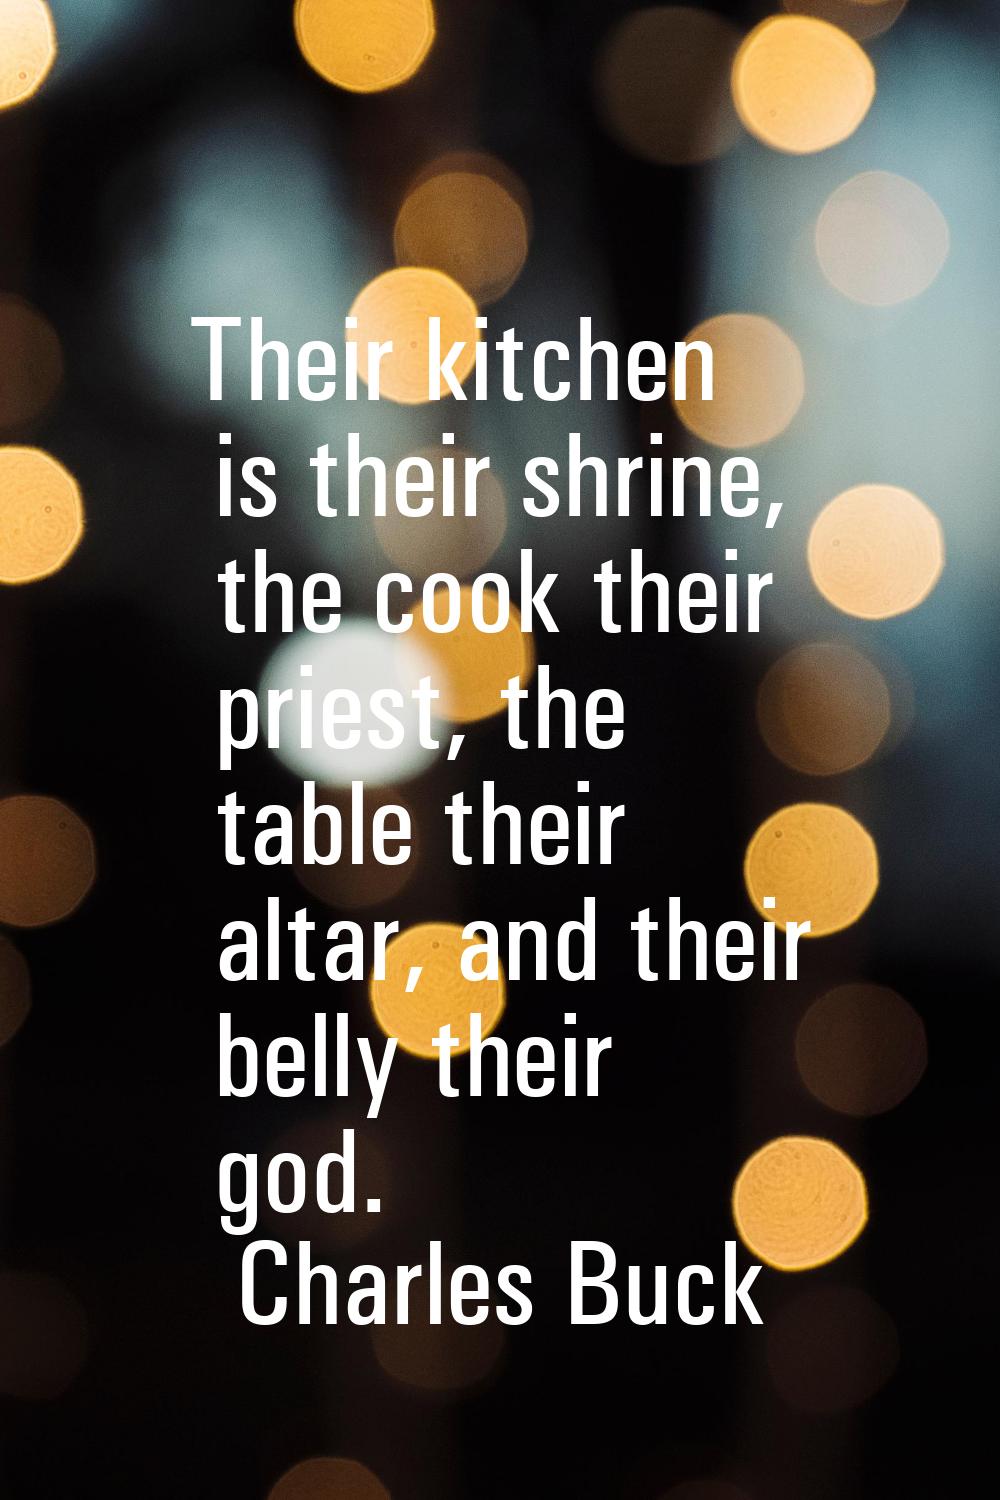 Their kitchen is their shrine, the cook their priest, the table their altar, and their belly their 